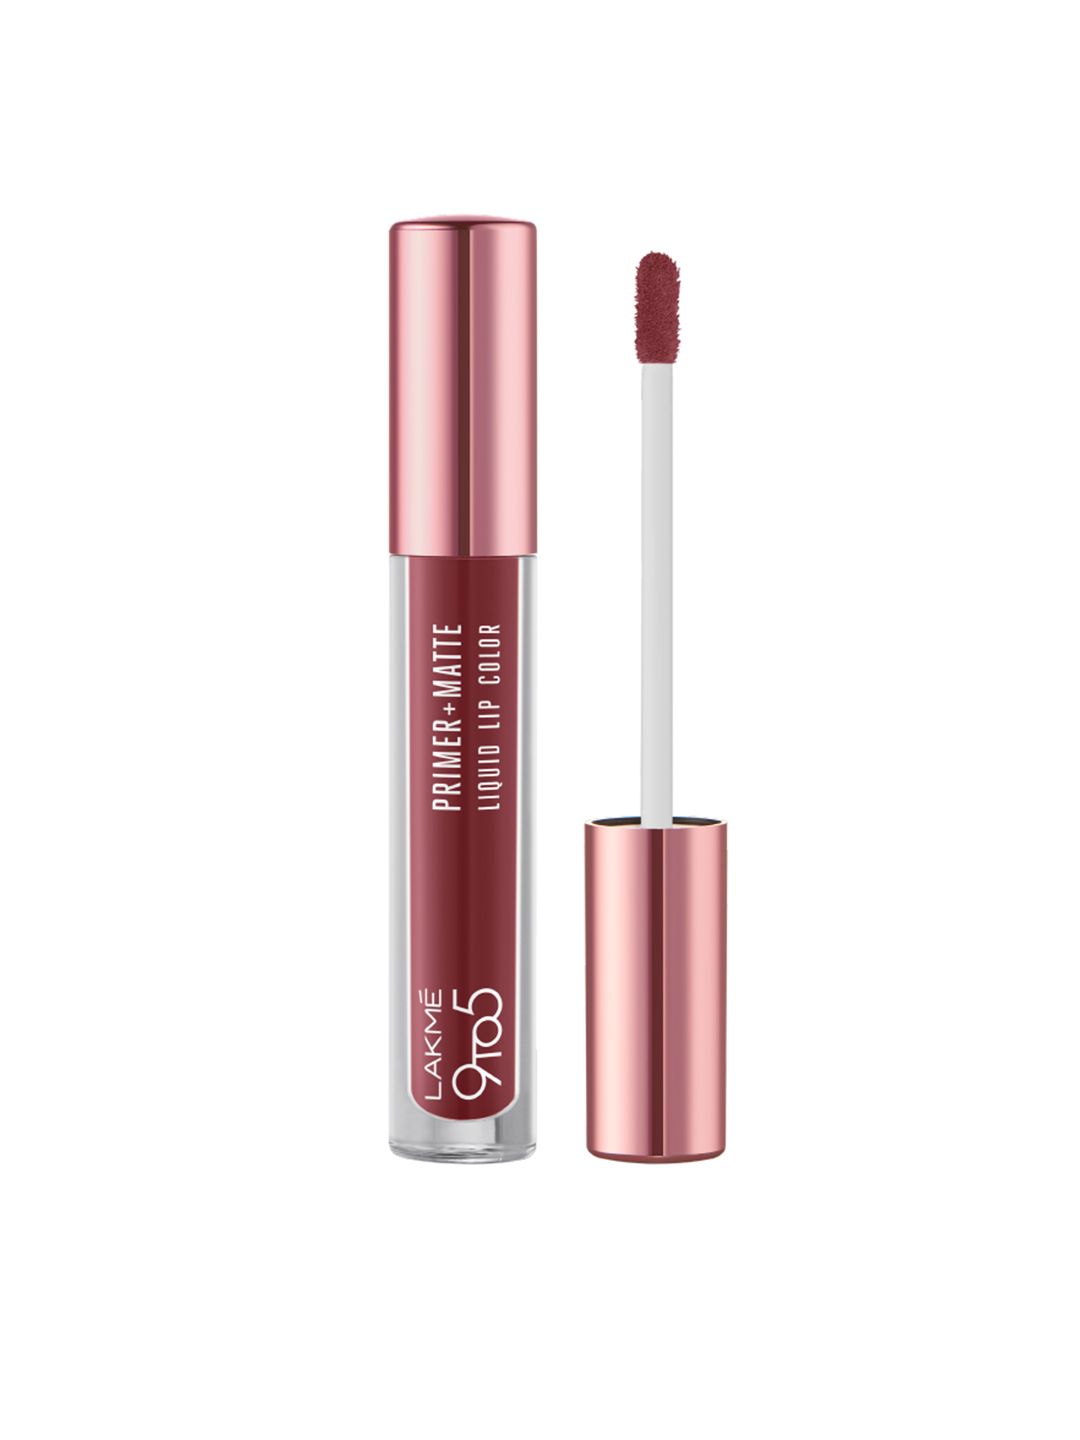 Lakme 9to 5 Primer+Matte Liquid Lip Color with Vit-E and Argan Oil 4.2ml-Hustling Nude MB1 Price in India